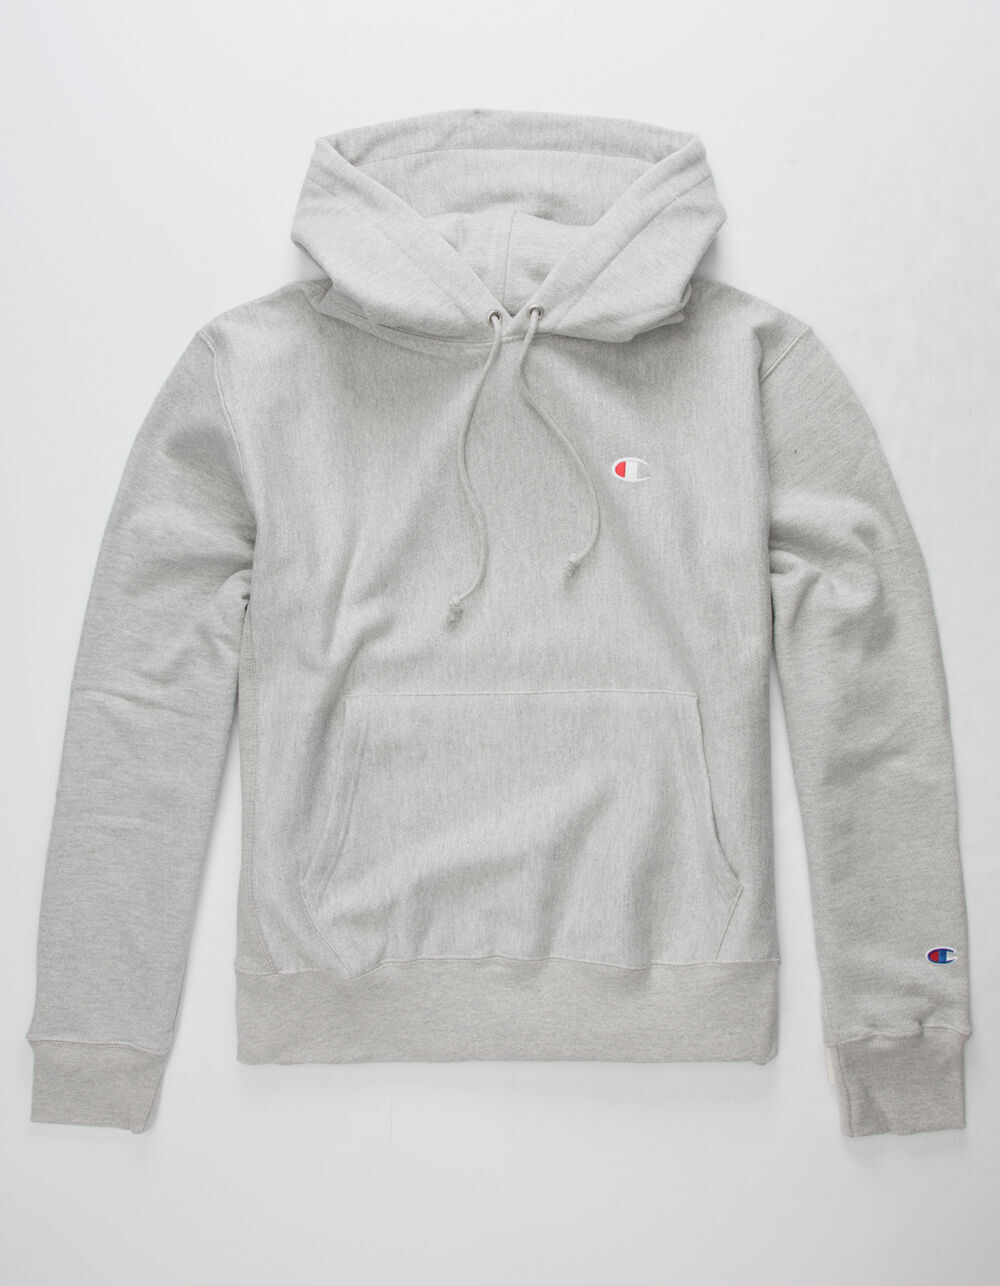 Barber shop Out saddle CHAMPION Reverse Weave Gray Mens Hoodie - GRAY | Tillys